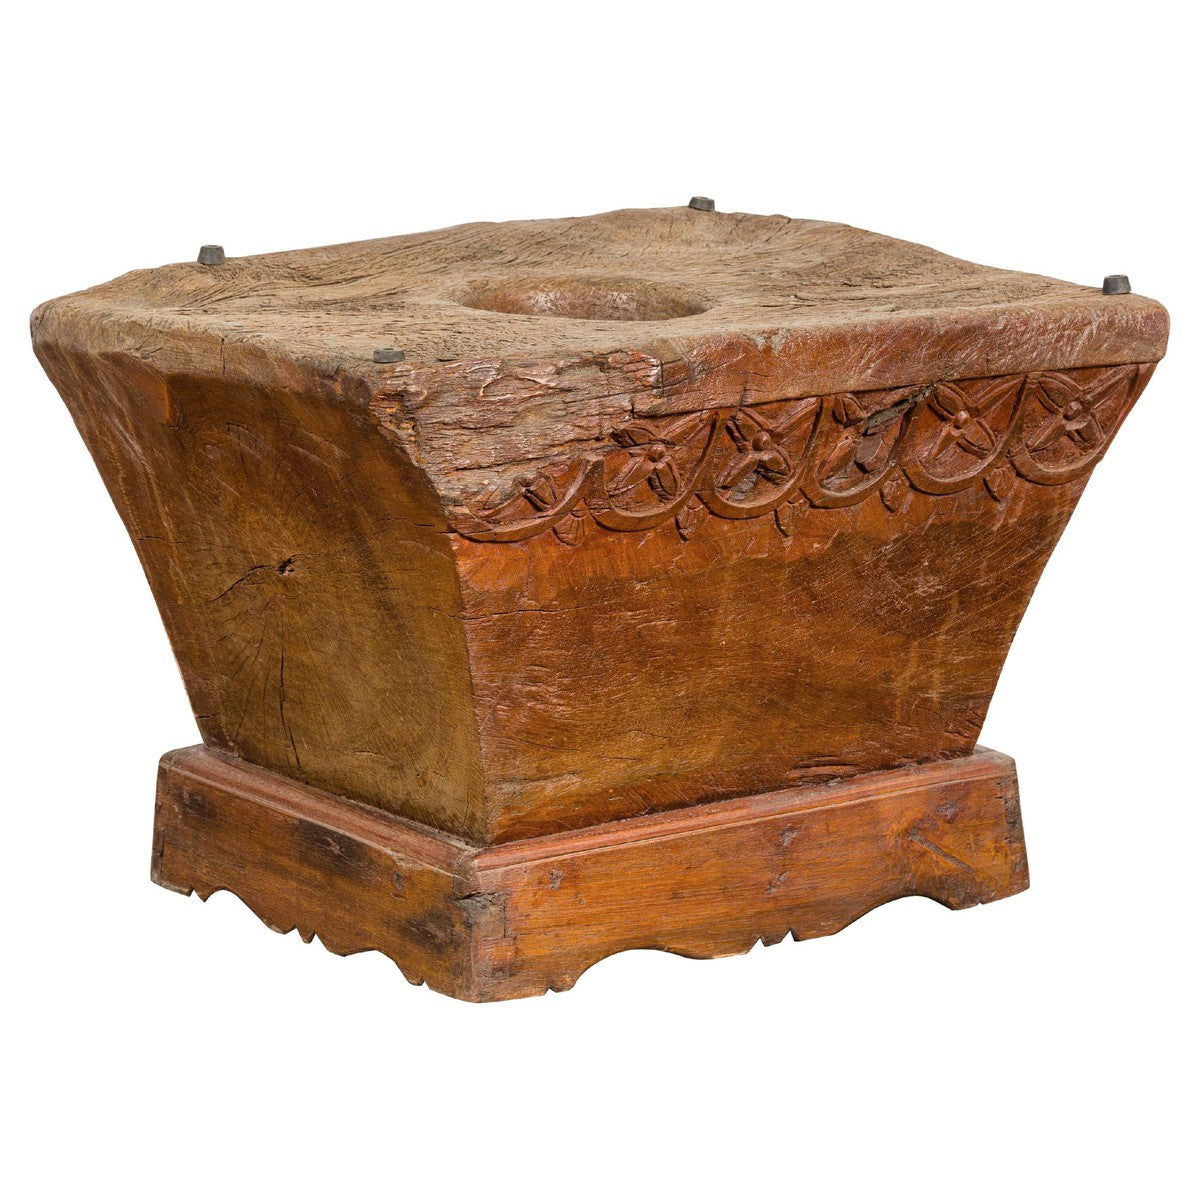 Teak Wood Primitive Mortar Converted into Coffee Table with Carved Rosettes-YN7837-1. Asian & Chinese Furniture, Art, Antiques, Vintage Home Décor for sale at FEA Home